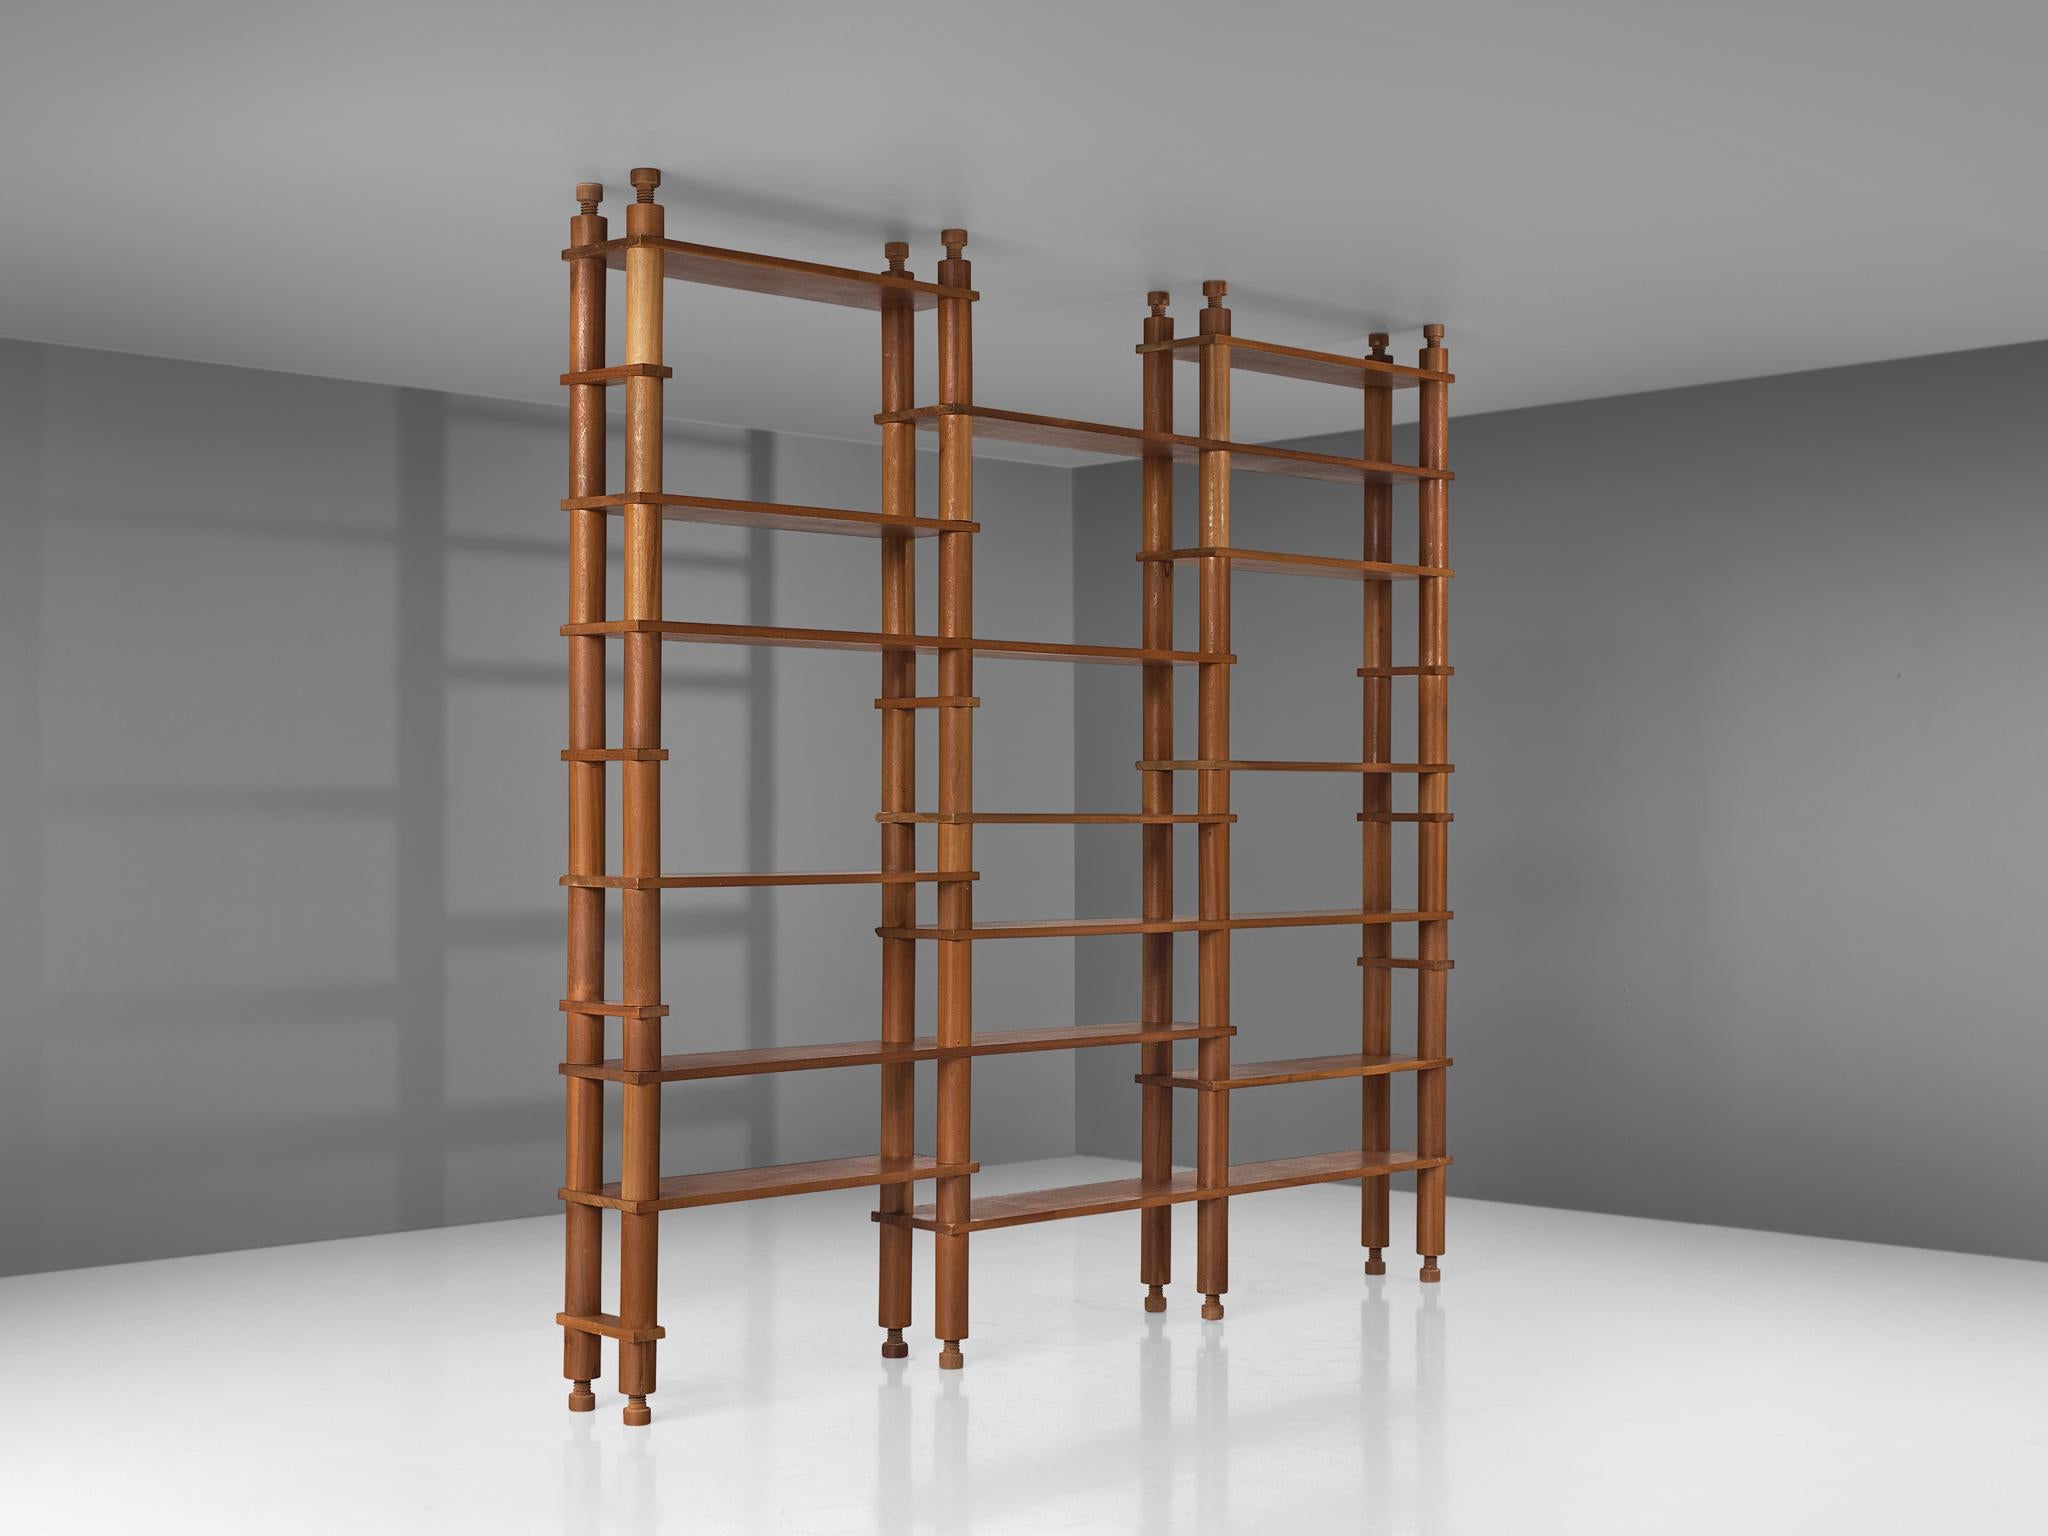 Wall unit, mahogany, France, 1960s

A large French shelving system which is completely executed in mahogany wood. The freestanding cabinet is build up with wooden cylindrical tubes. Each point of connection holds a bookshelf, creating a playful